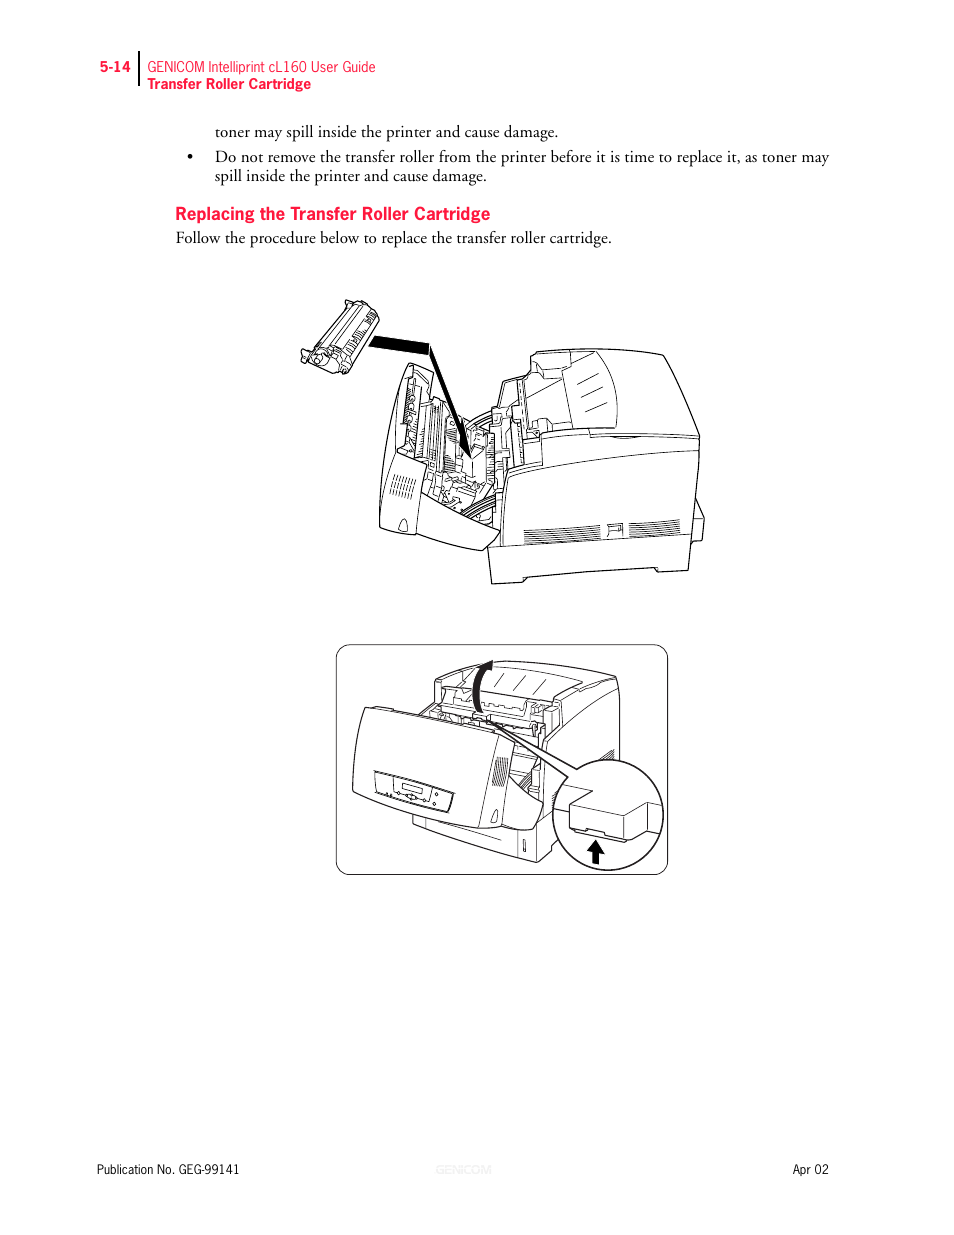 Replacing the transfer roller cartridge 5-14 | Genicom cL160 User Manual | Page 126 / 216